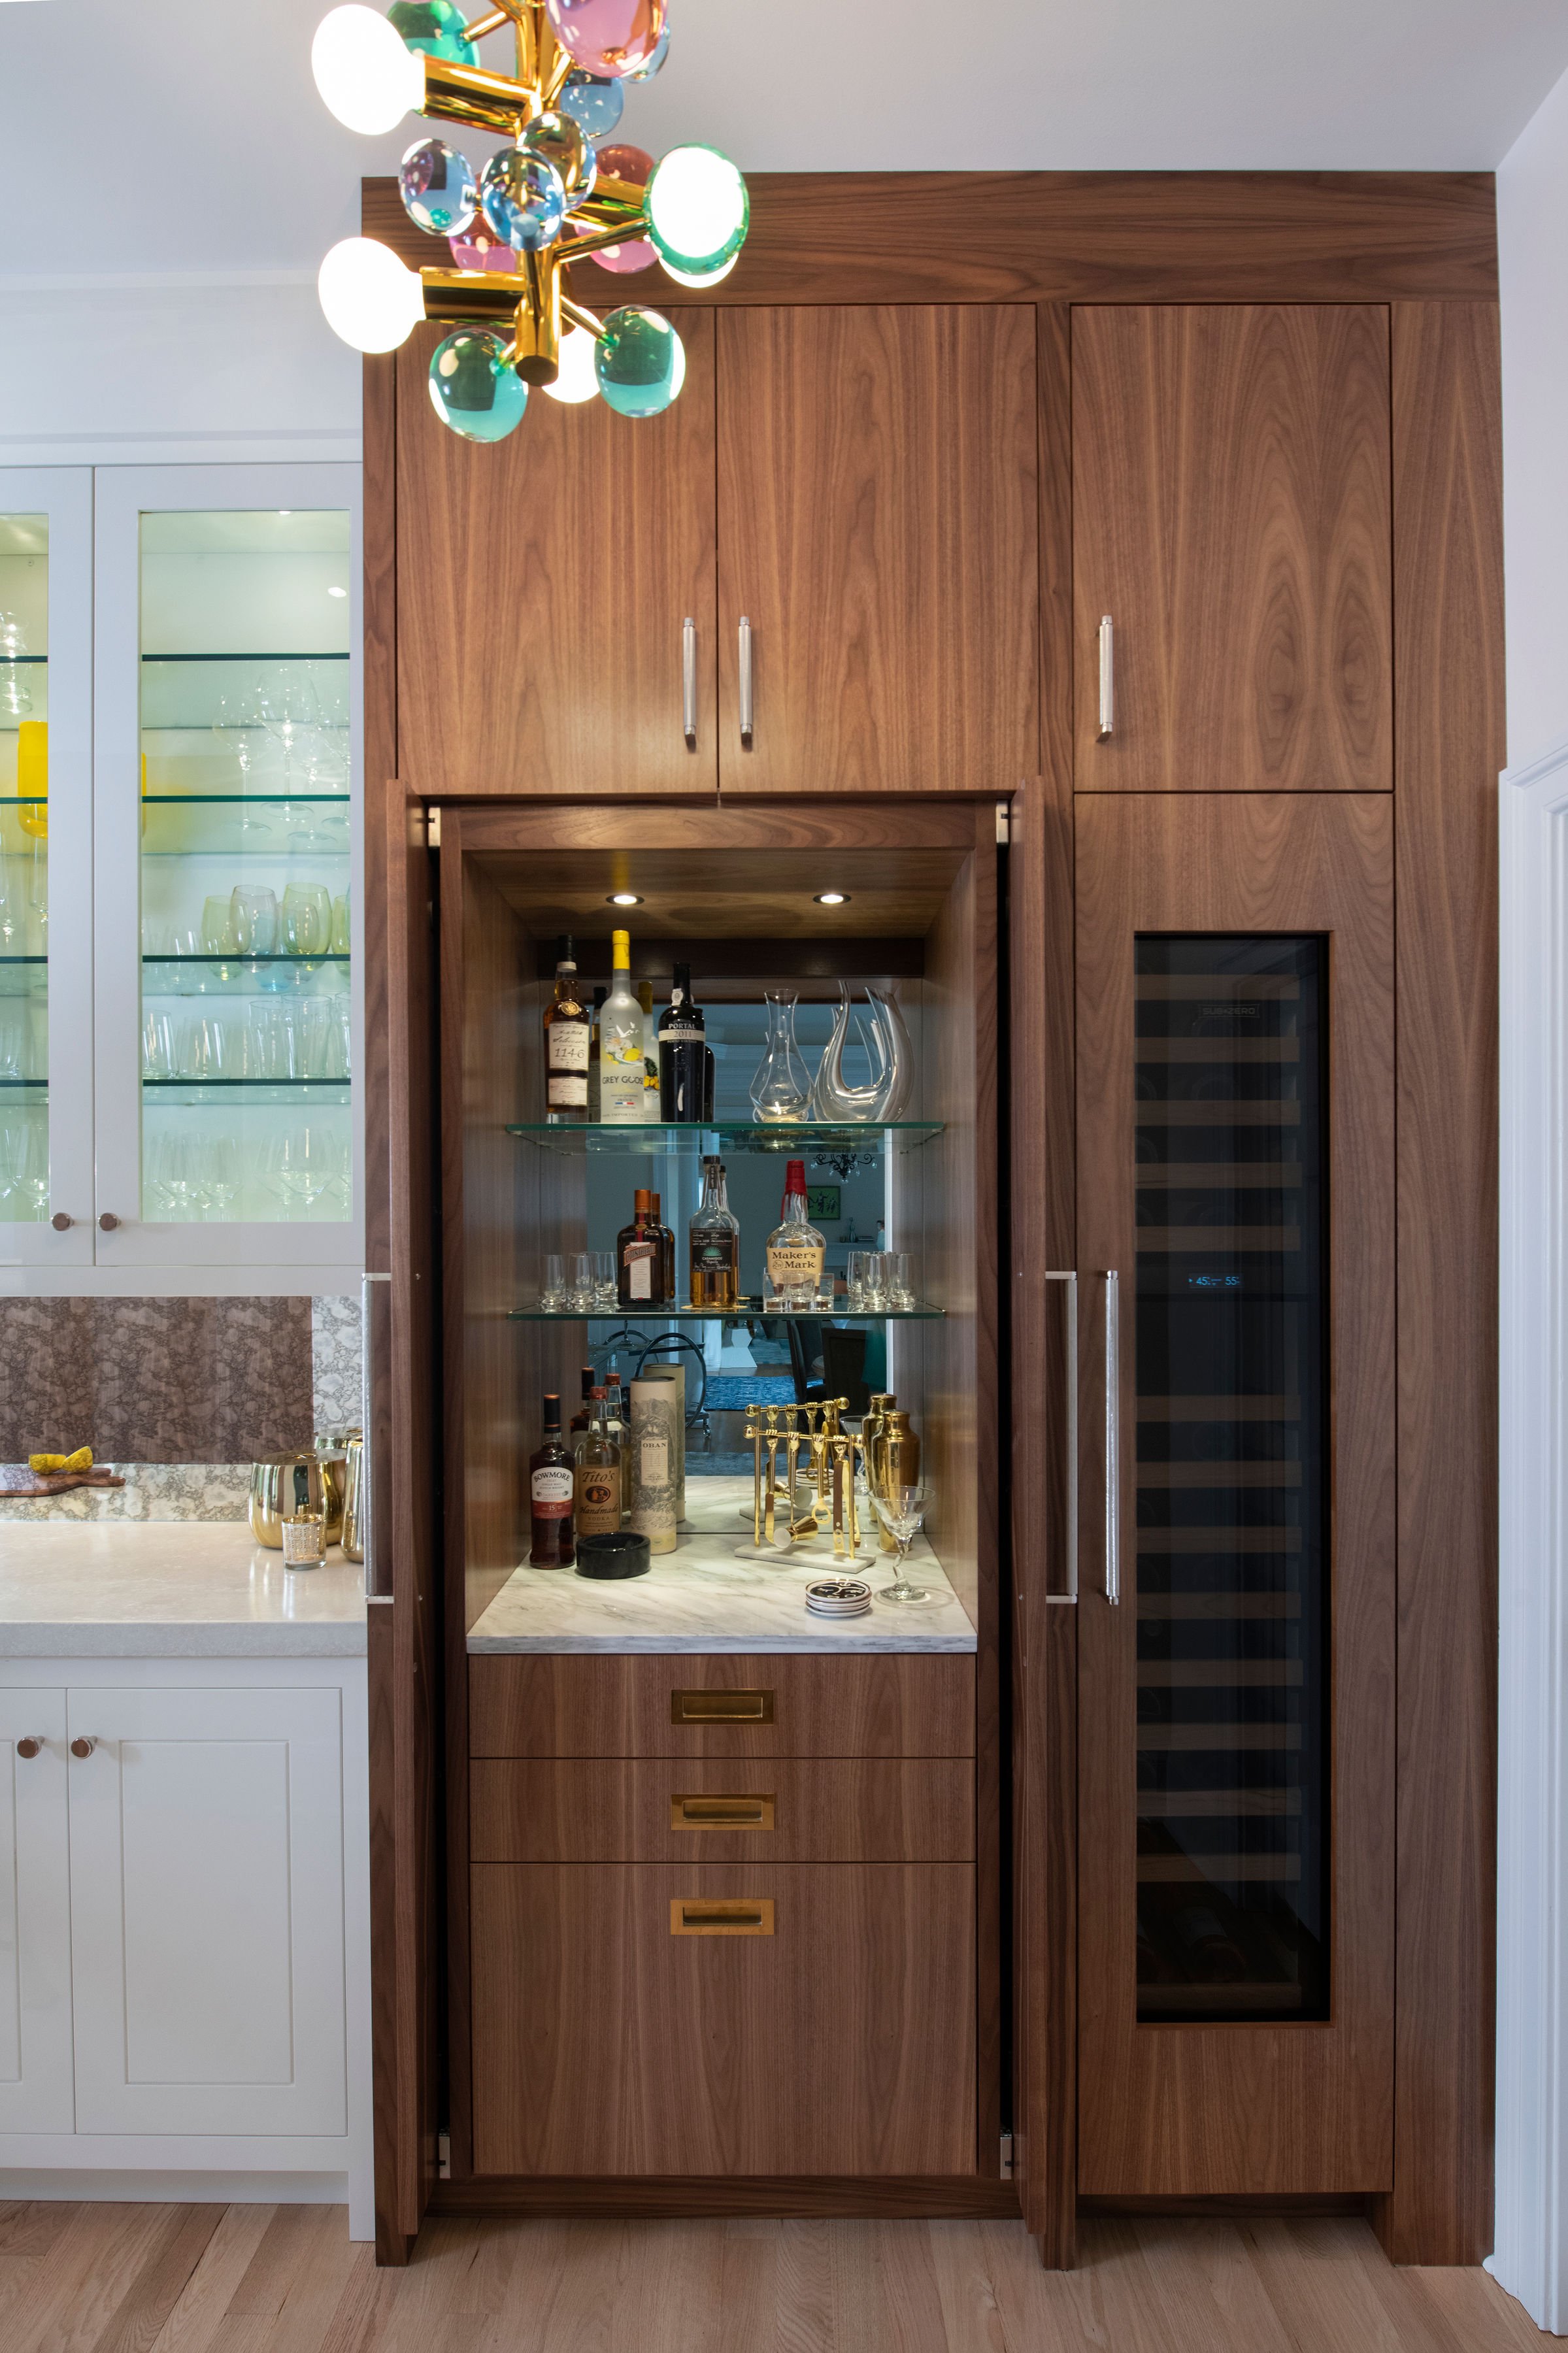  wine fridge and liquor cabinet shown here with pocket doors opened, revealing drawers and lighted glass cabinets for liquor 